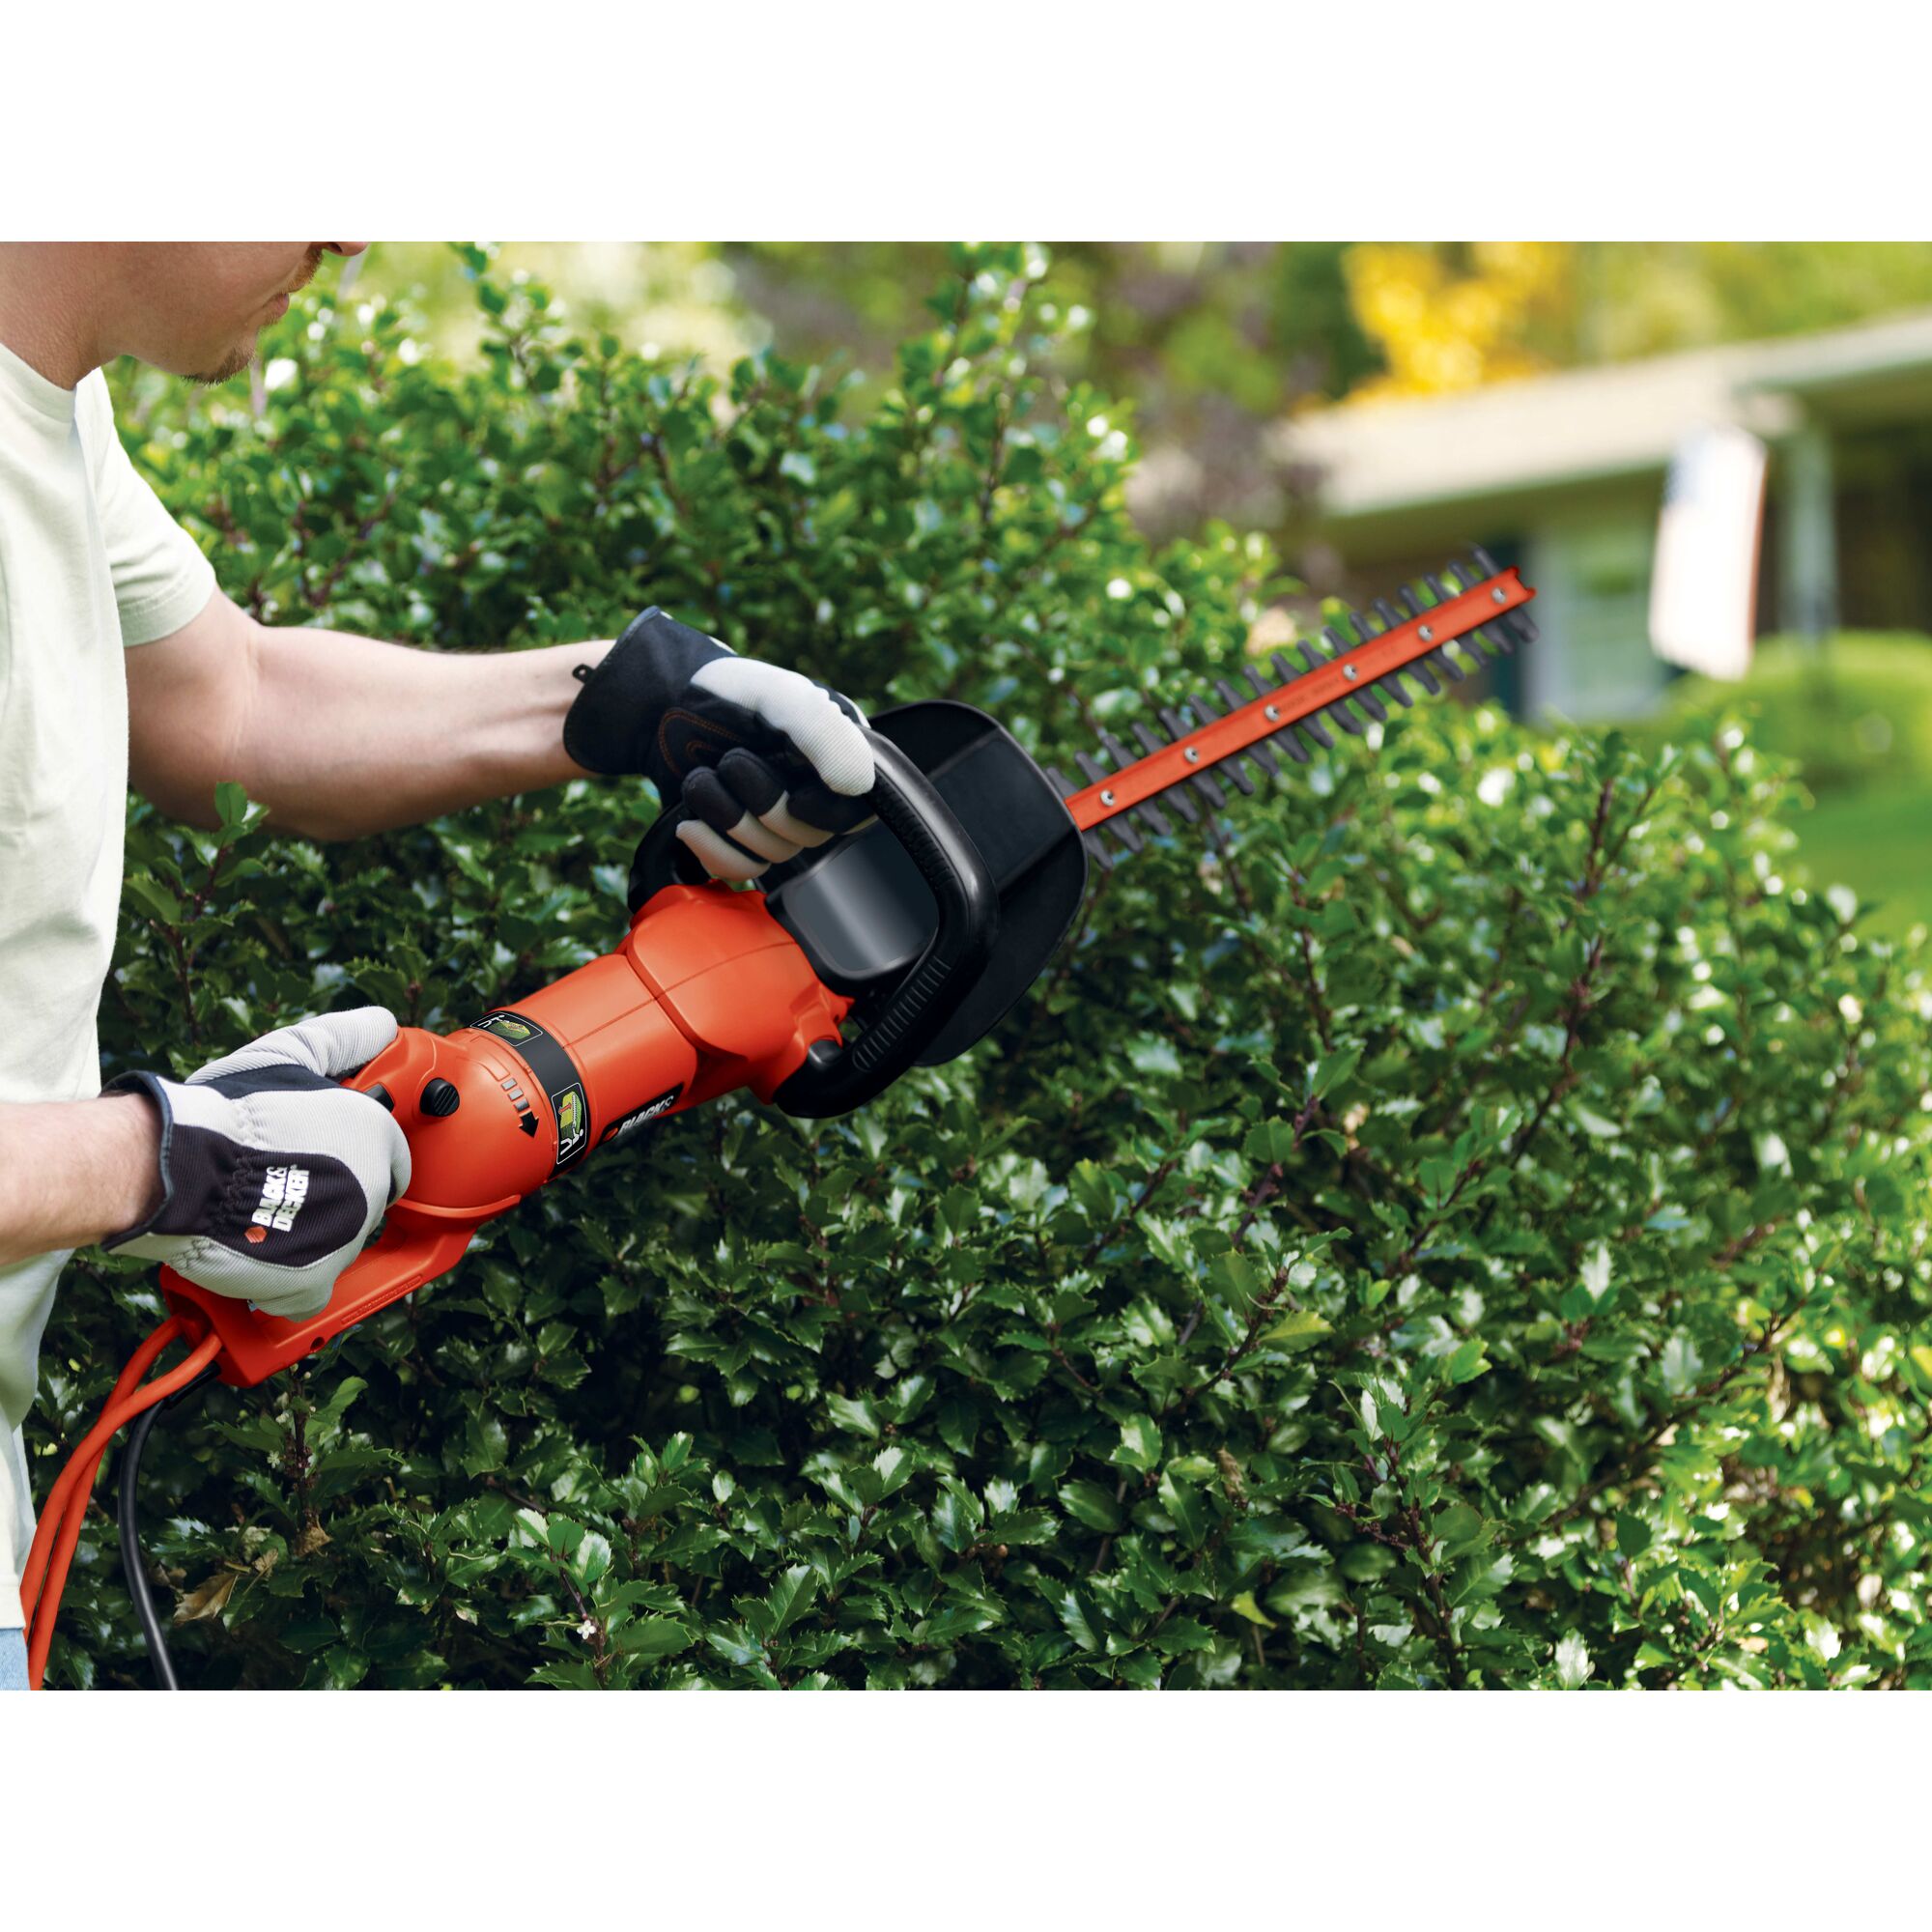 Hedge trimmer with rotating handle trimming bushes.